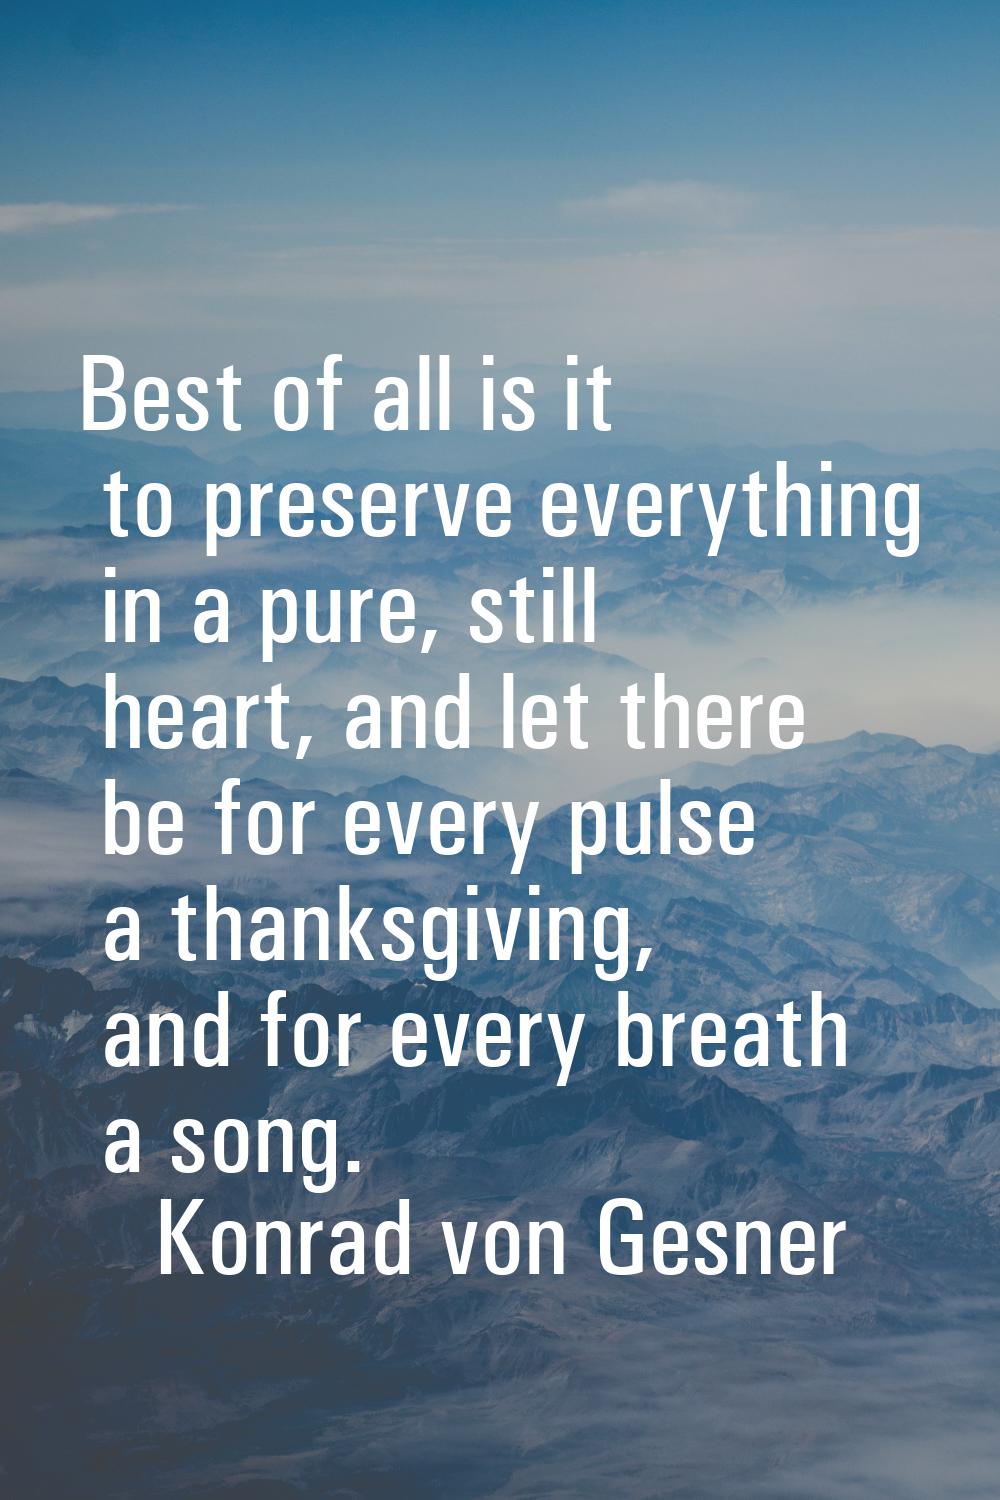 Best of all is it to preserve everything in a pure, still heart, and let there be for every pulse a